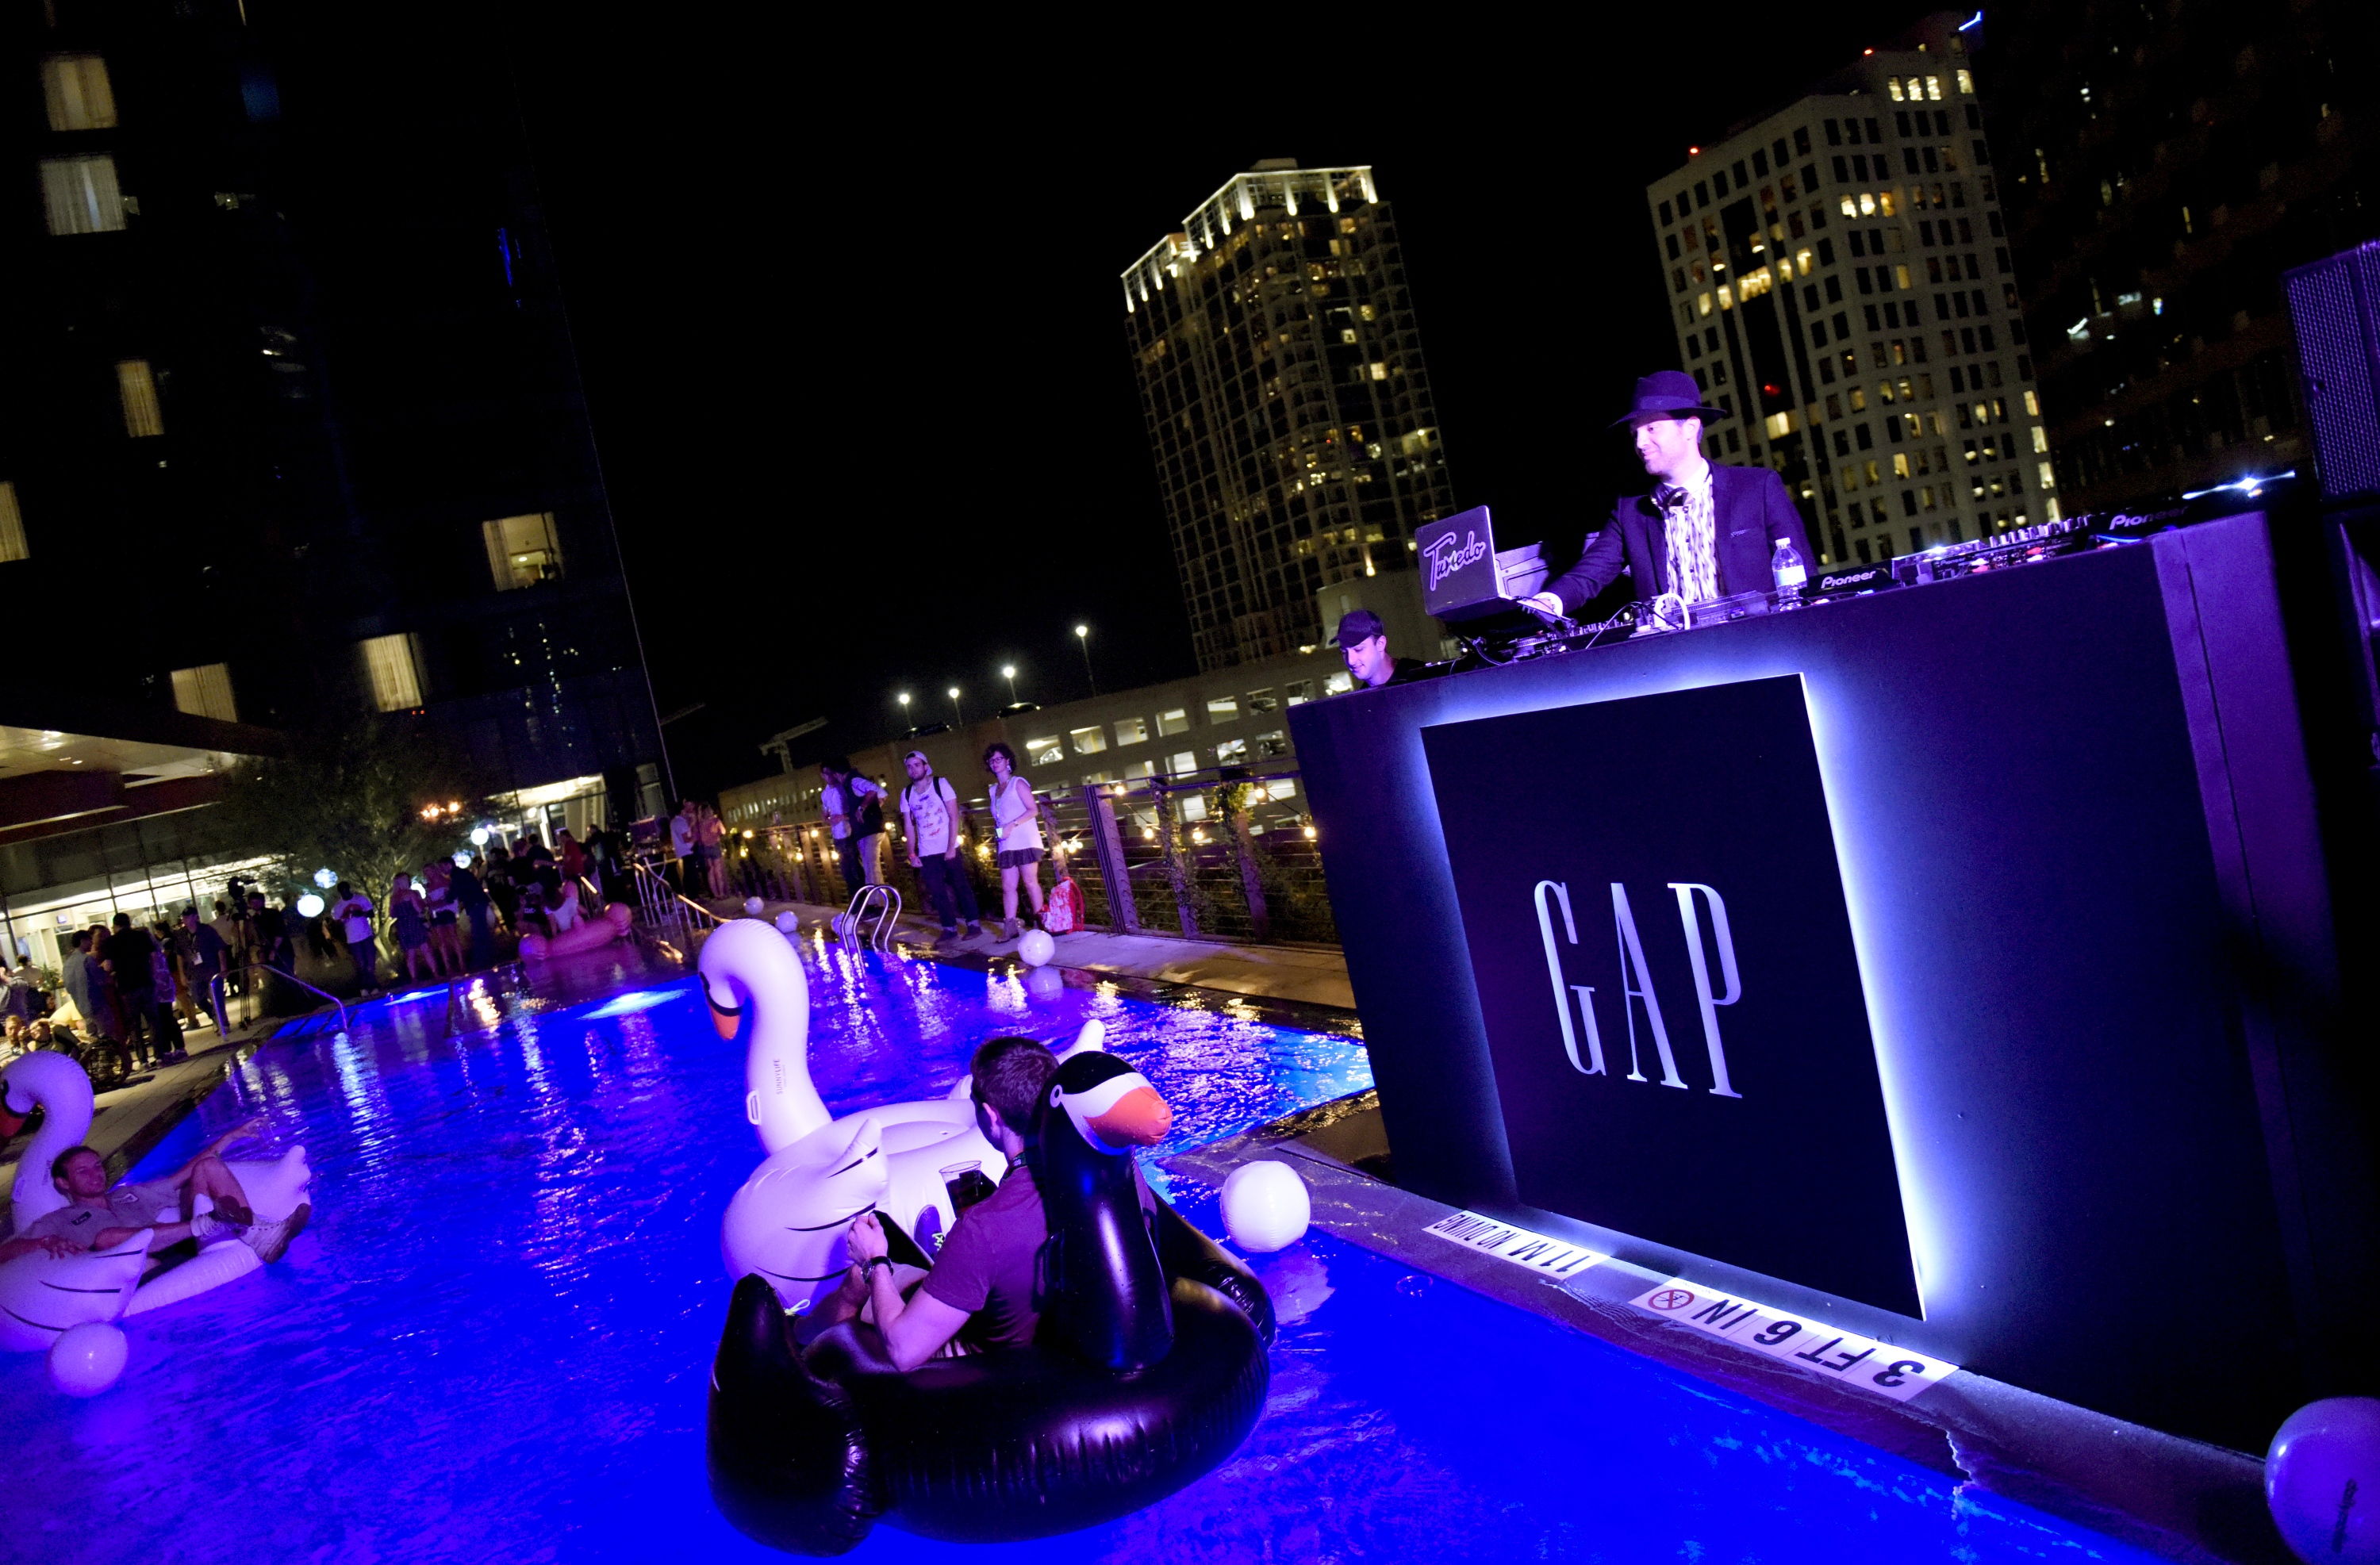 AUSTIN, TX - MARCH 15:  DJ Mayer Hawthorne spins at Music Is Universal Poolside DJ Bash, presented by Marriott Rewards and Universal Music Group, during SXSW at the JW Marriott Austin on March 15, 2016 in Austin, Texas.  (Photo by Vivien Killilea/Getty Images for Universal Music Group)